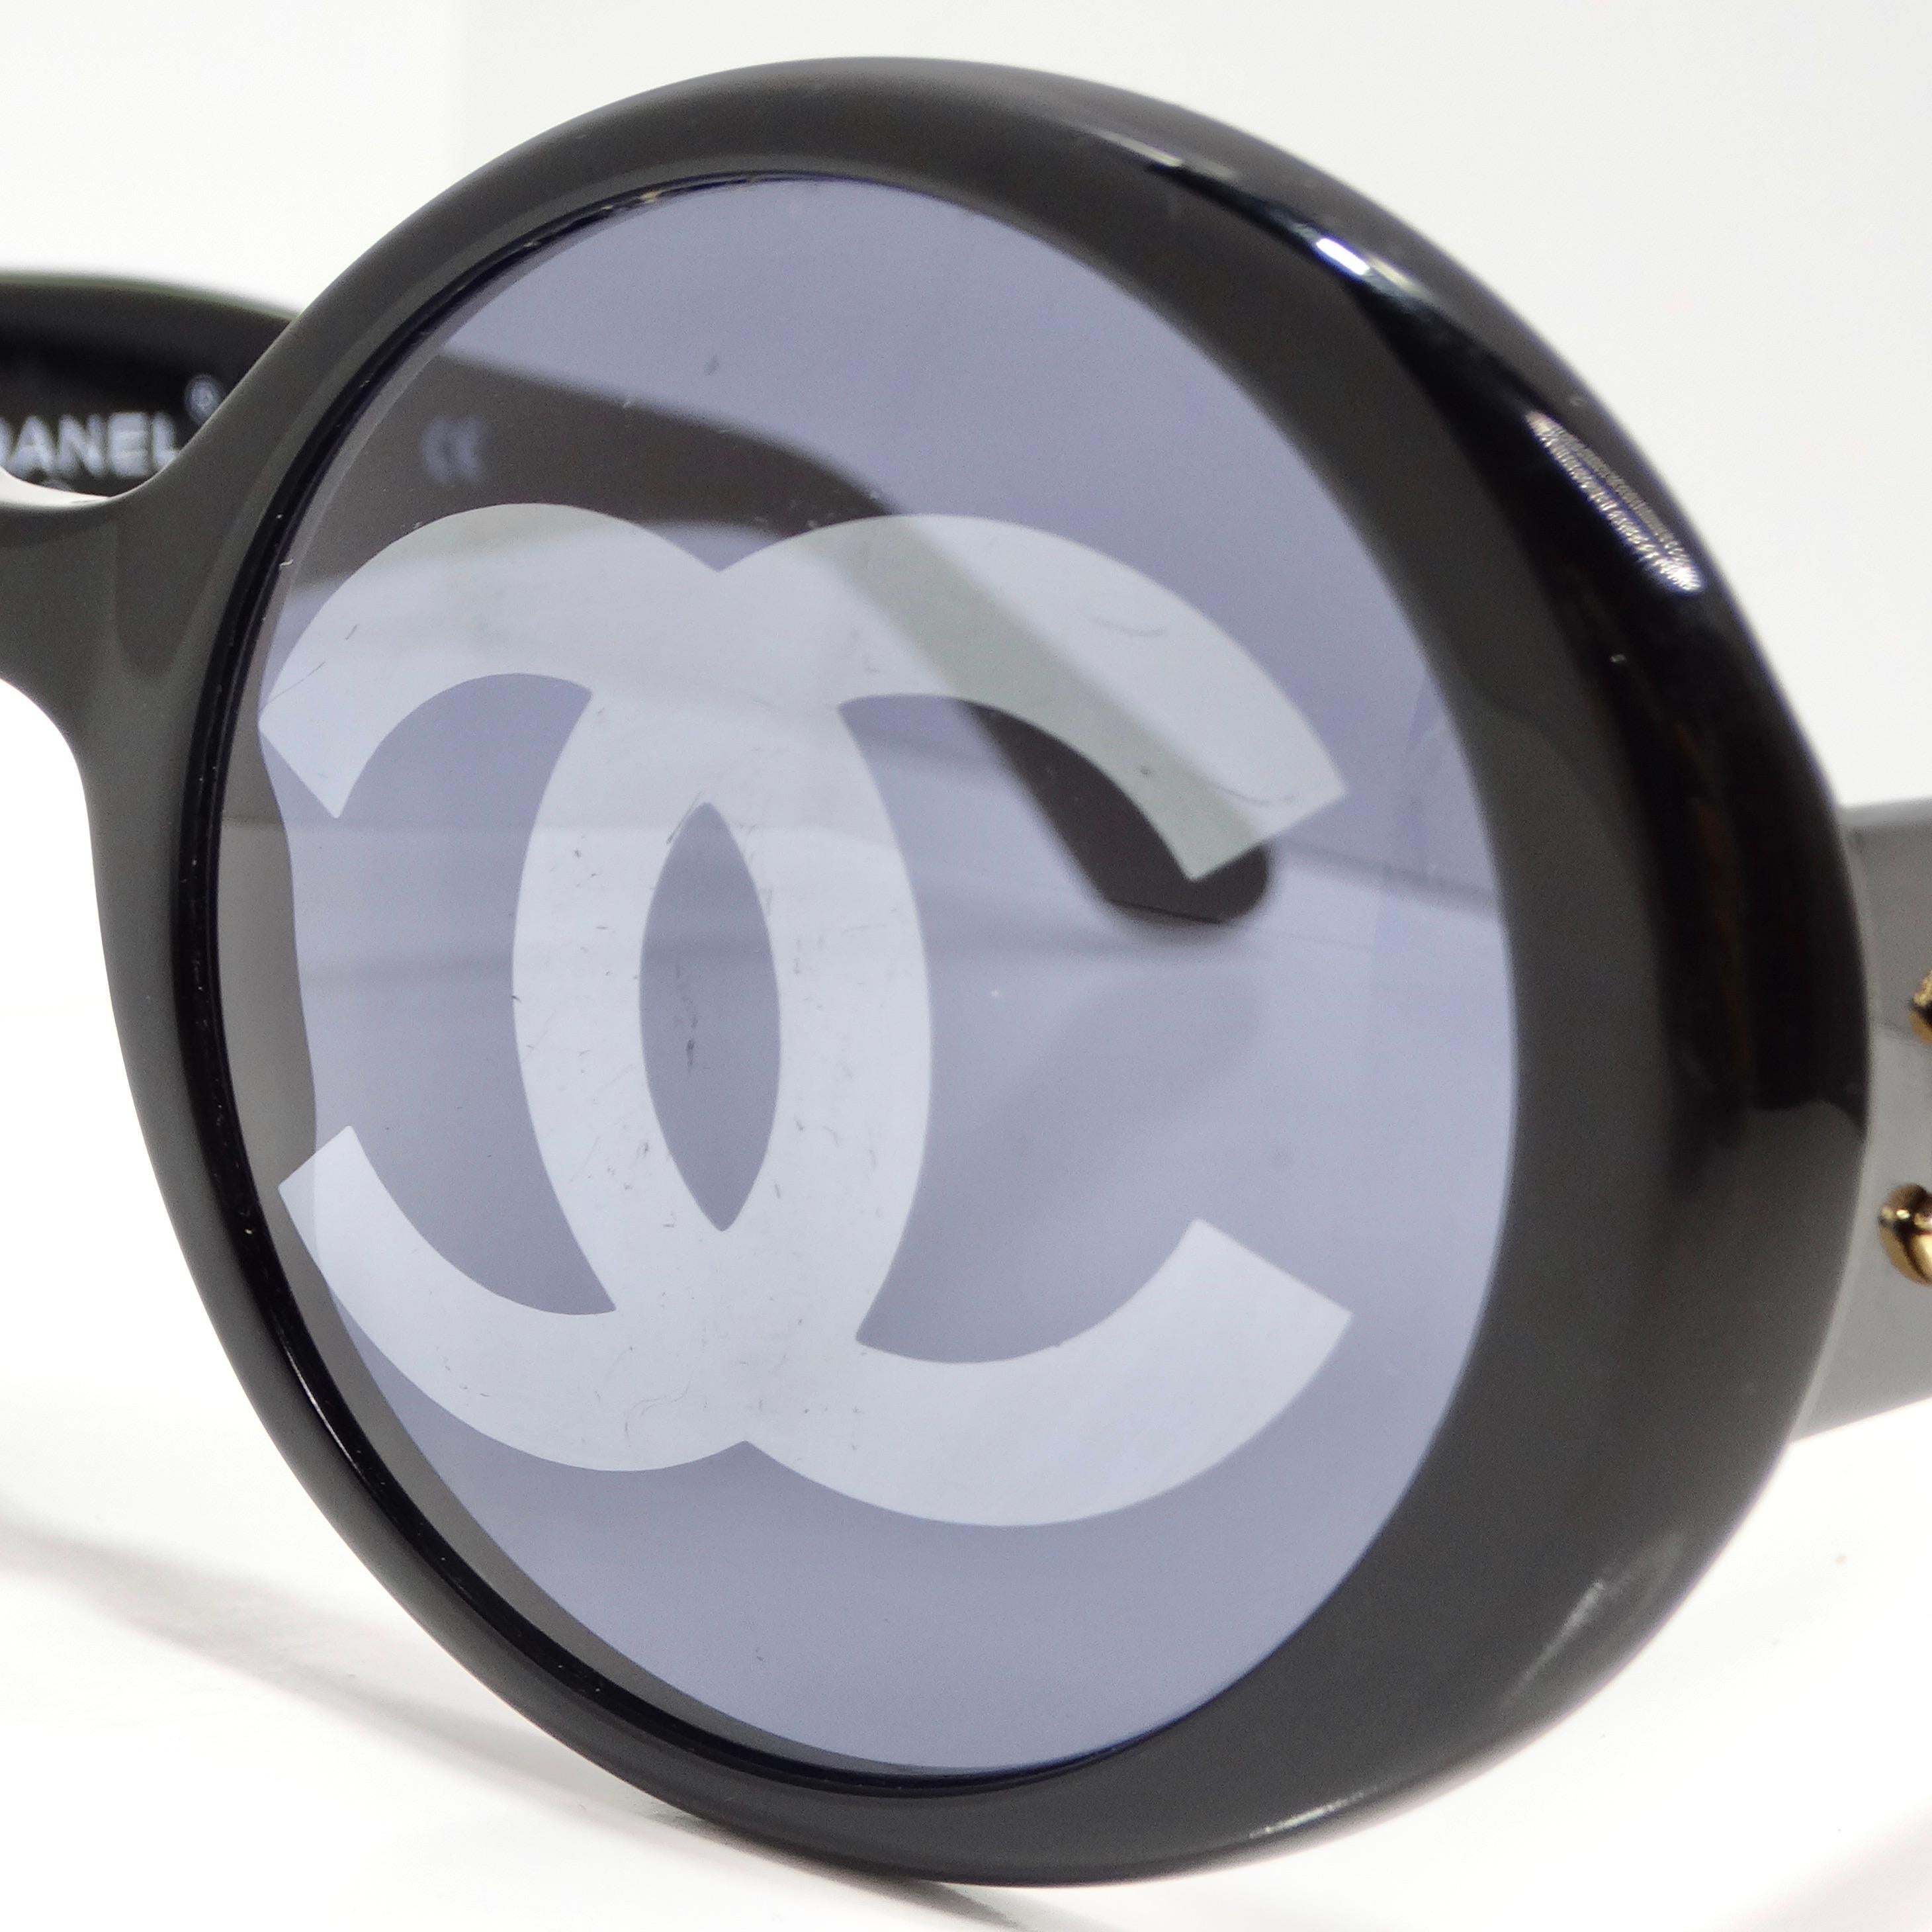 Chanel 1993 Black CC Logo Round Lens Sunglasses In Good Condition For Sale In Scottsdale, AZ